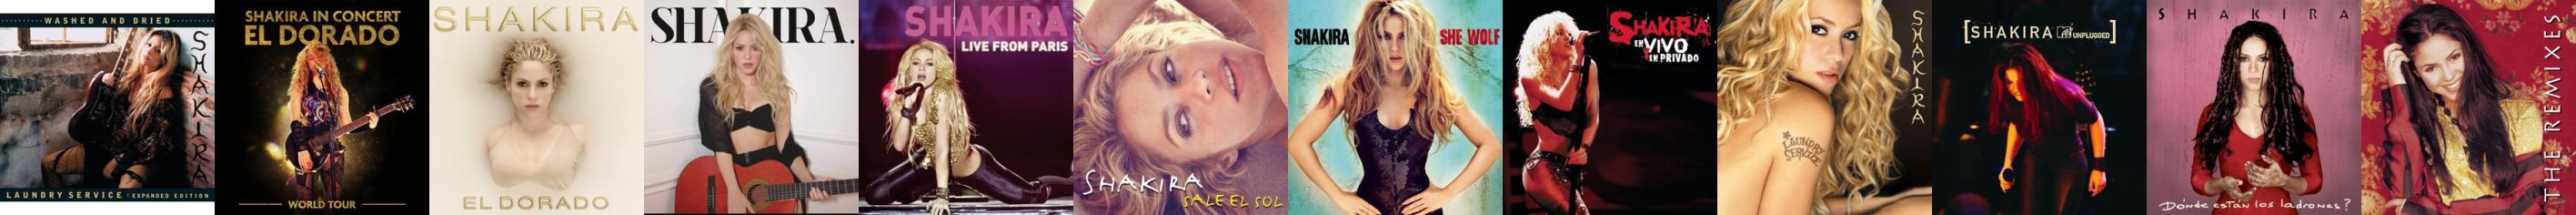 13 Of the Hottest Shakira Shirts & Tour Merch Items